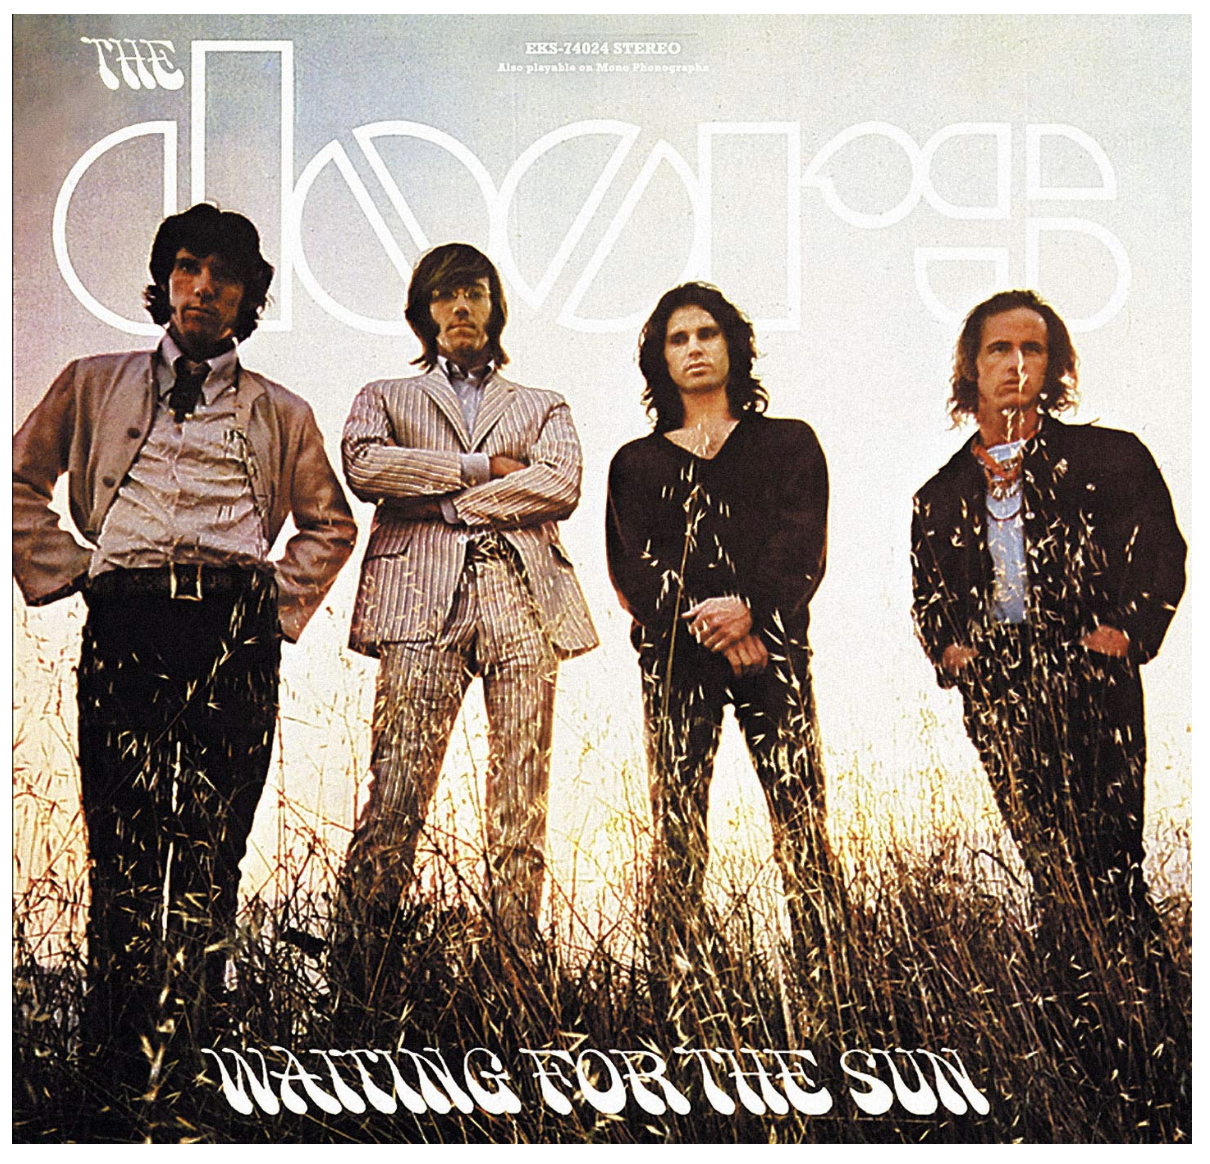 'Waiting for the Sun' - The Doors